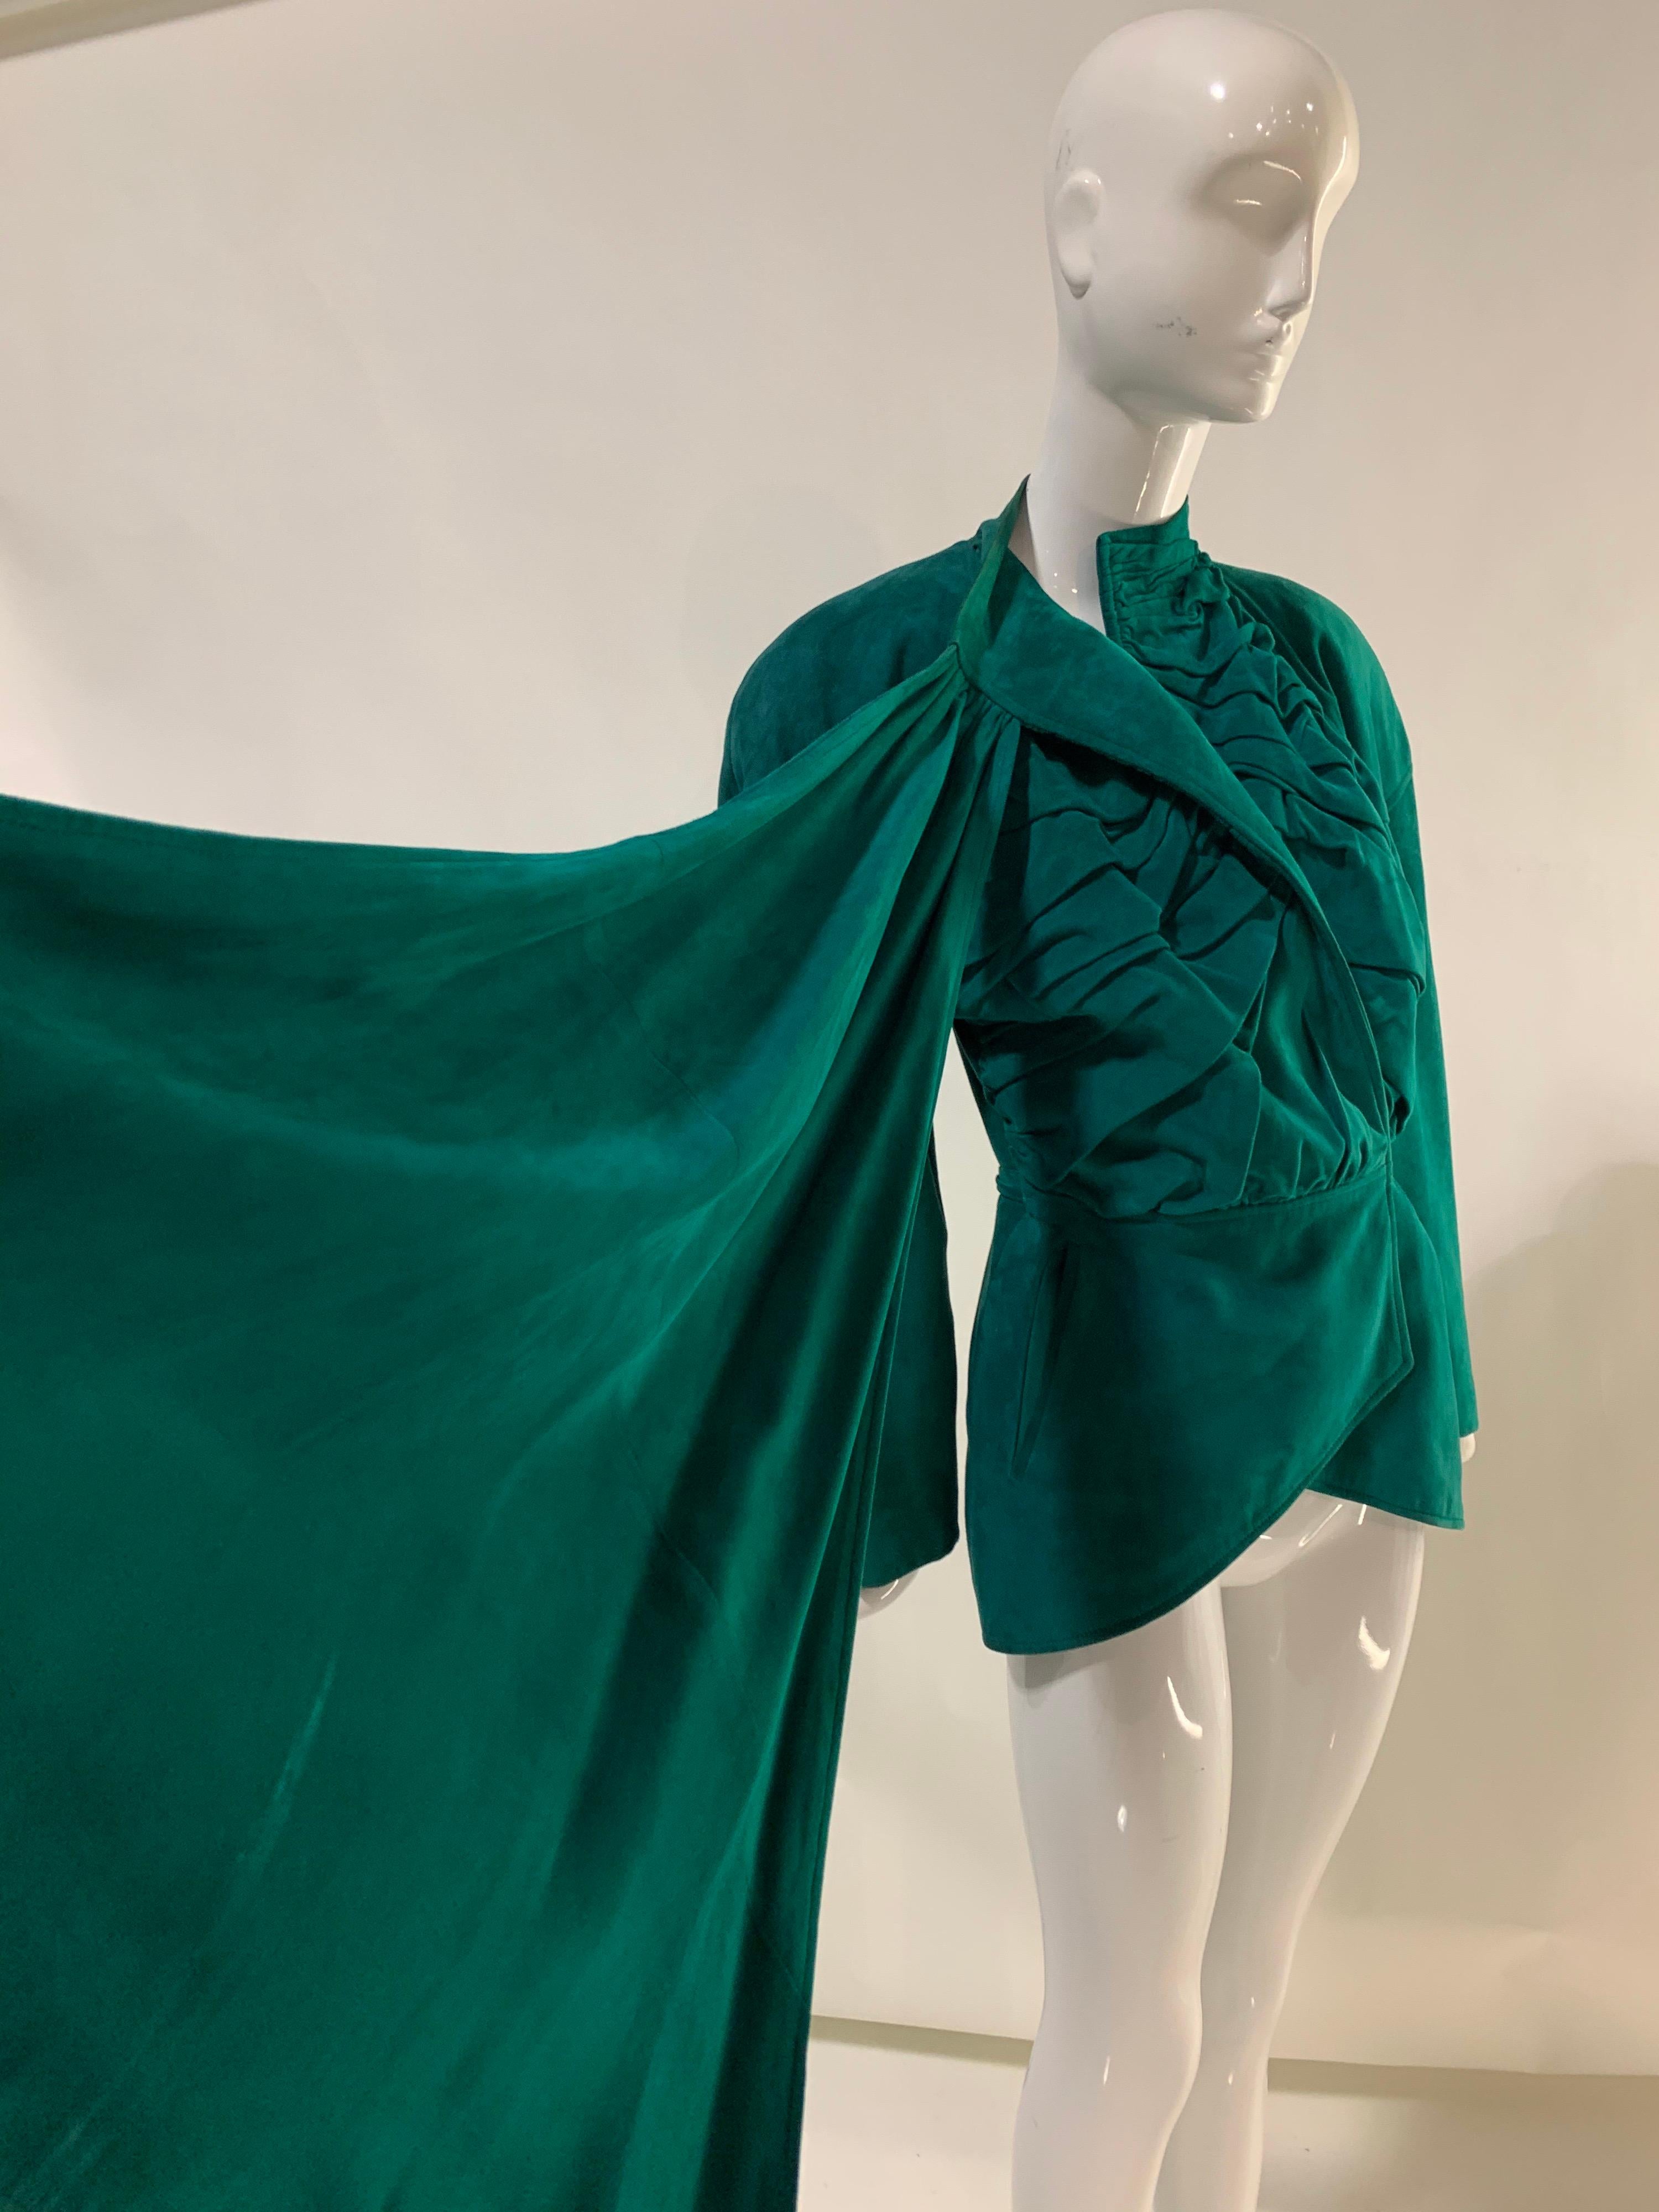 1980s Jean Claude Jitrois Emerald Suede Jacket w/ Gathered Front & Large Foulard For Sale 3